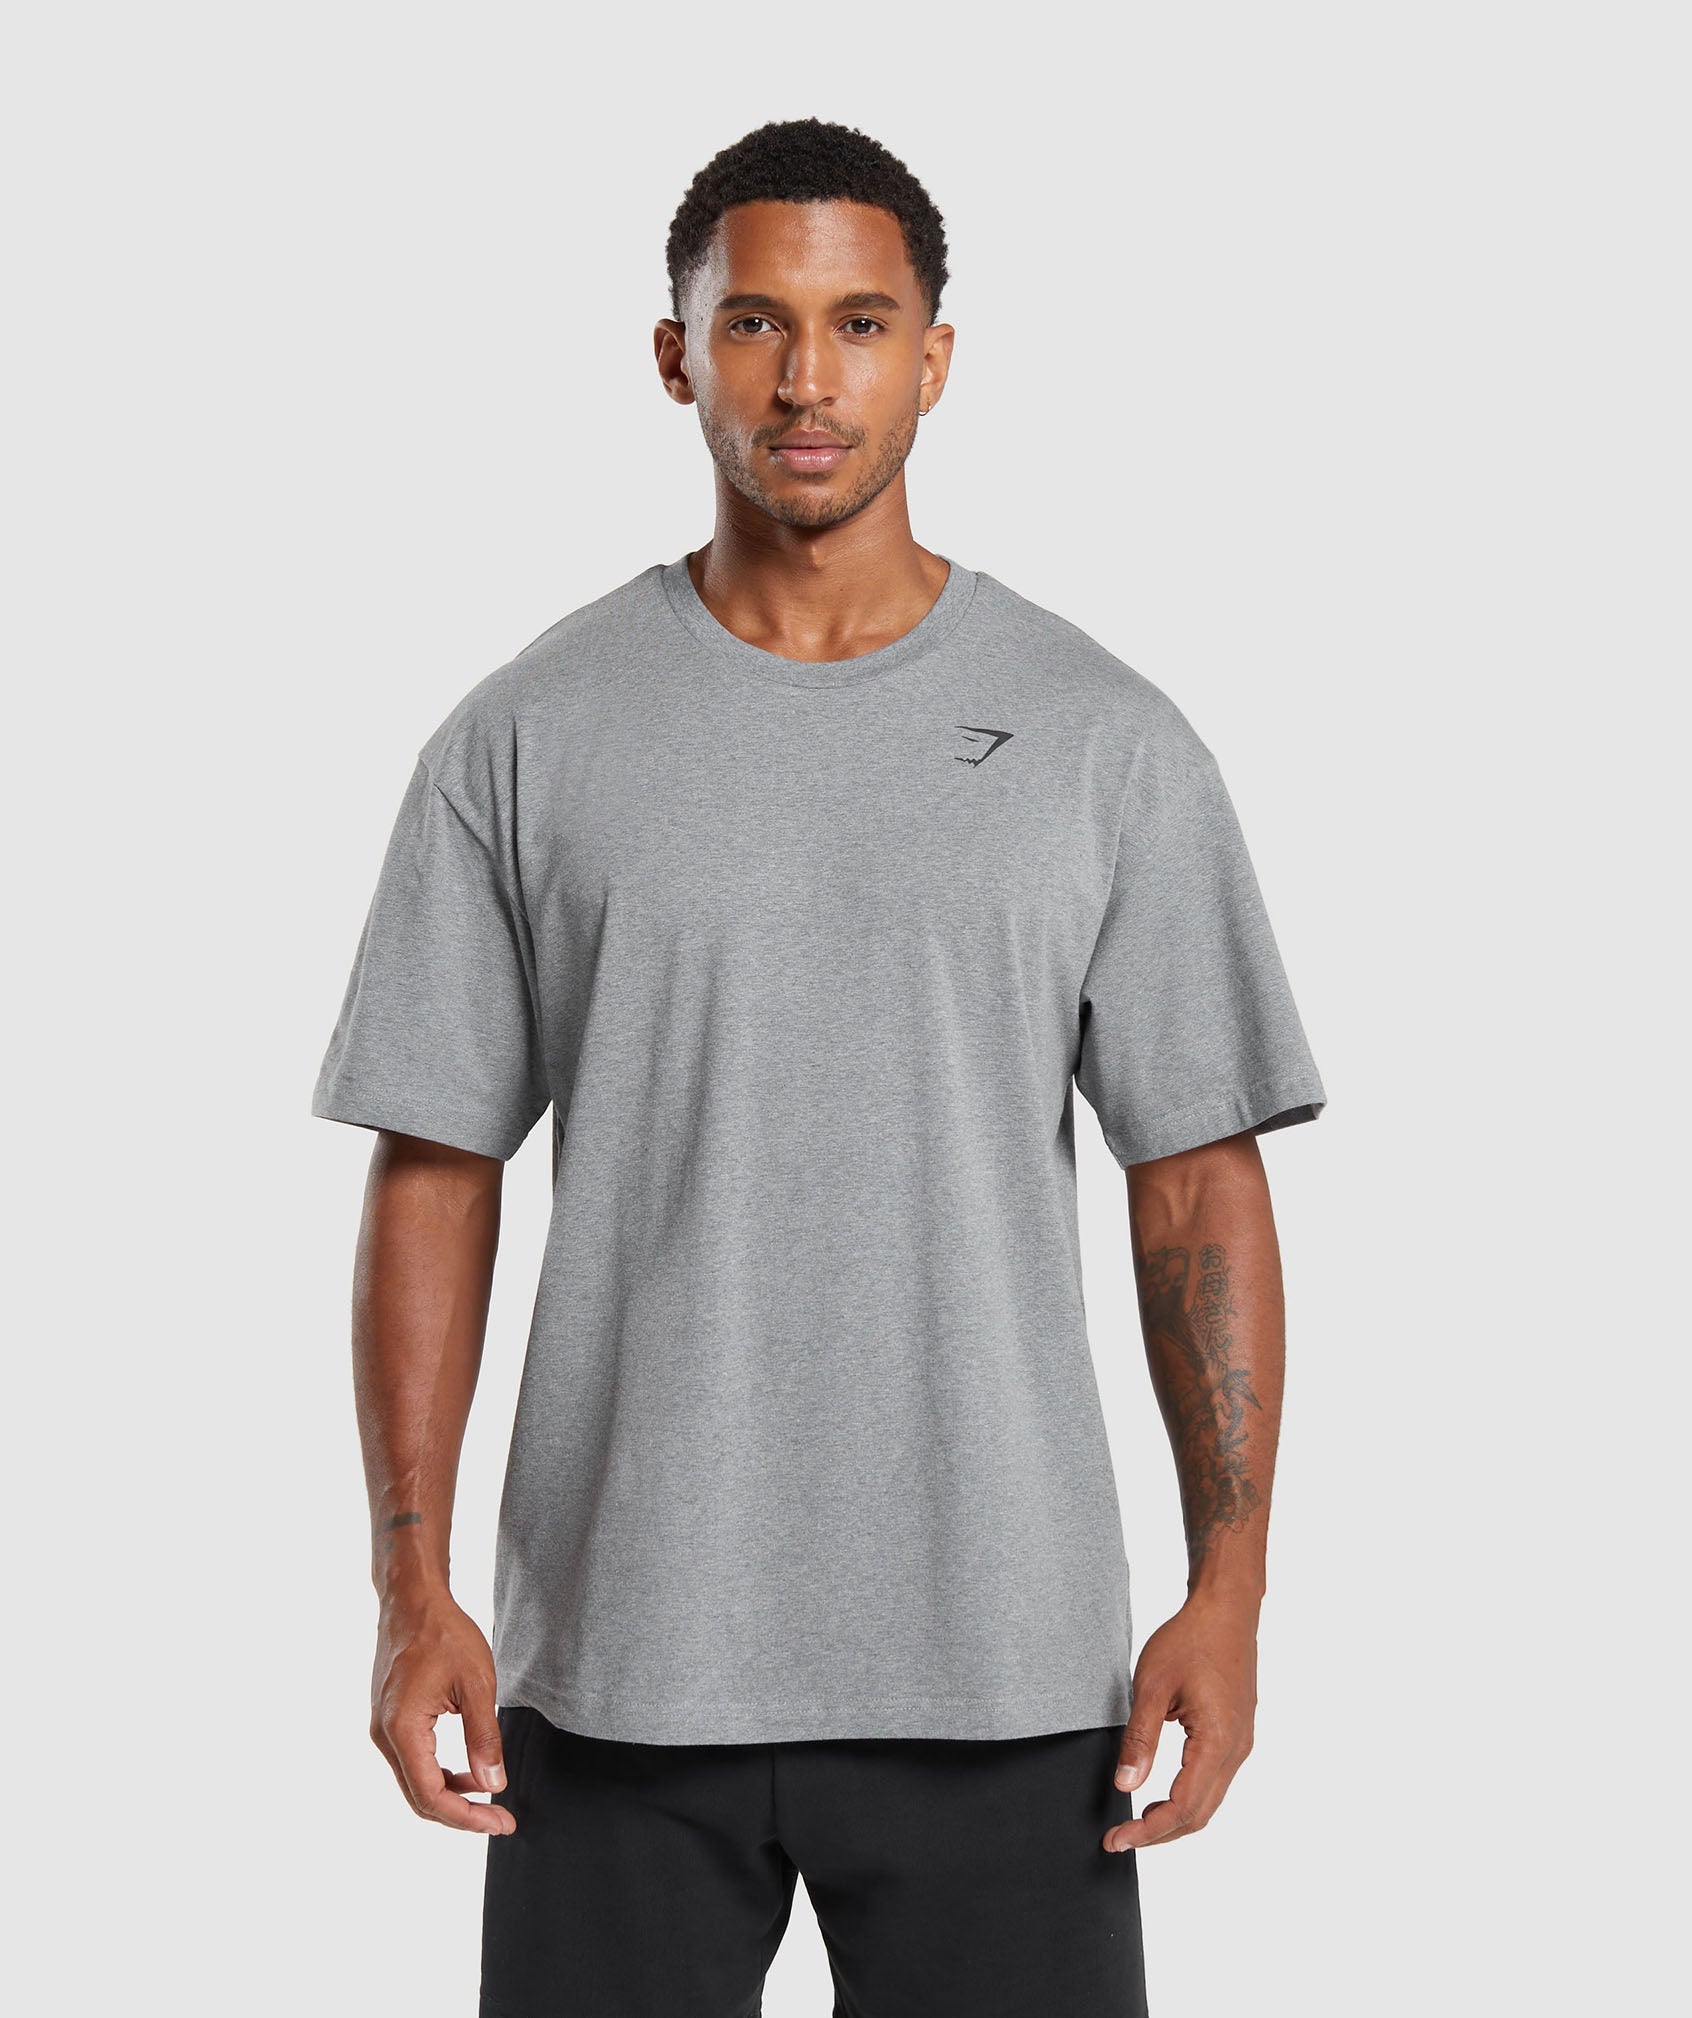 Essential Oversized T-Shirt in Charcoal Grey Marl - view 1